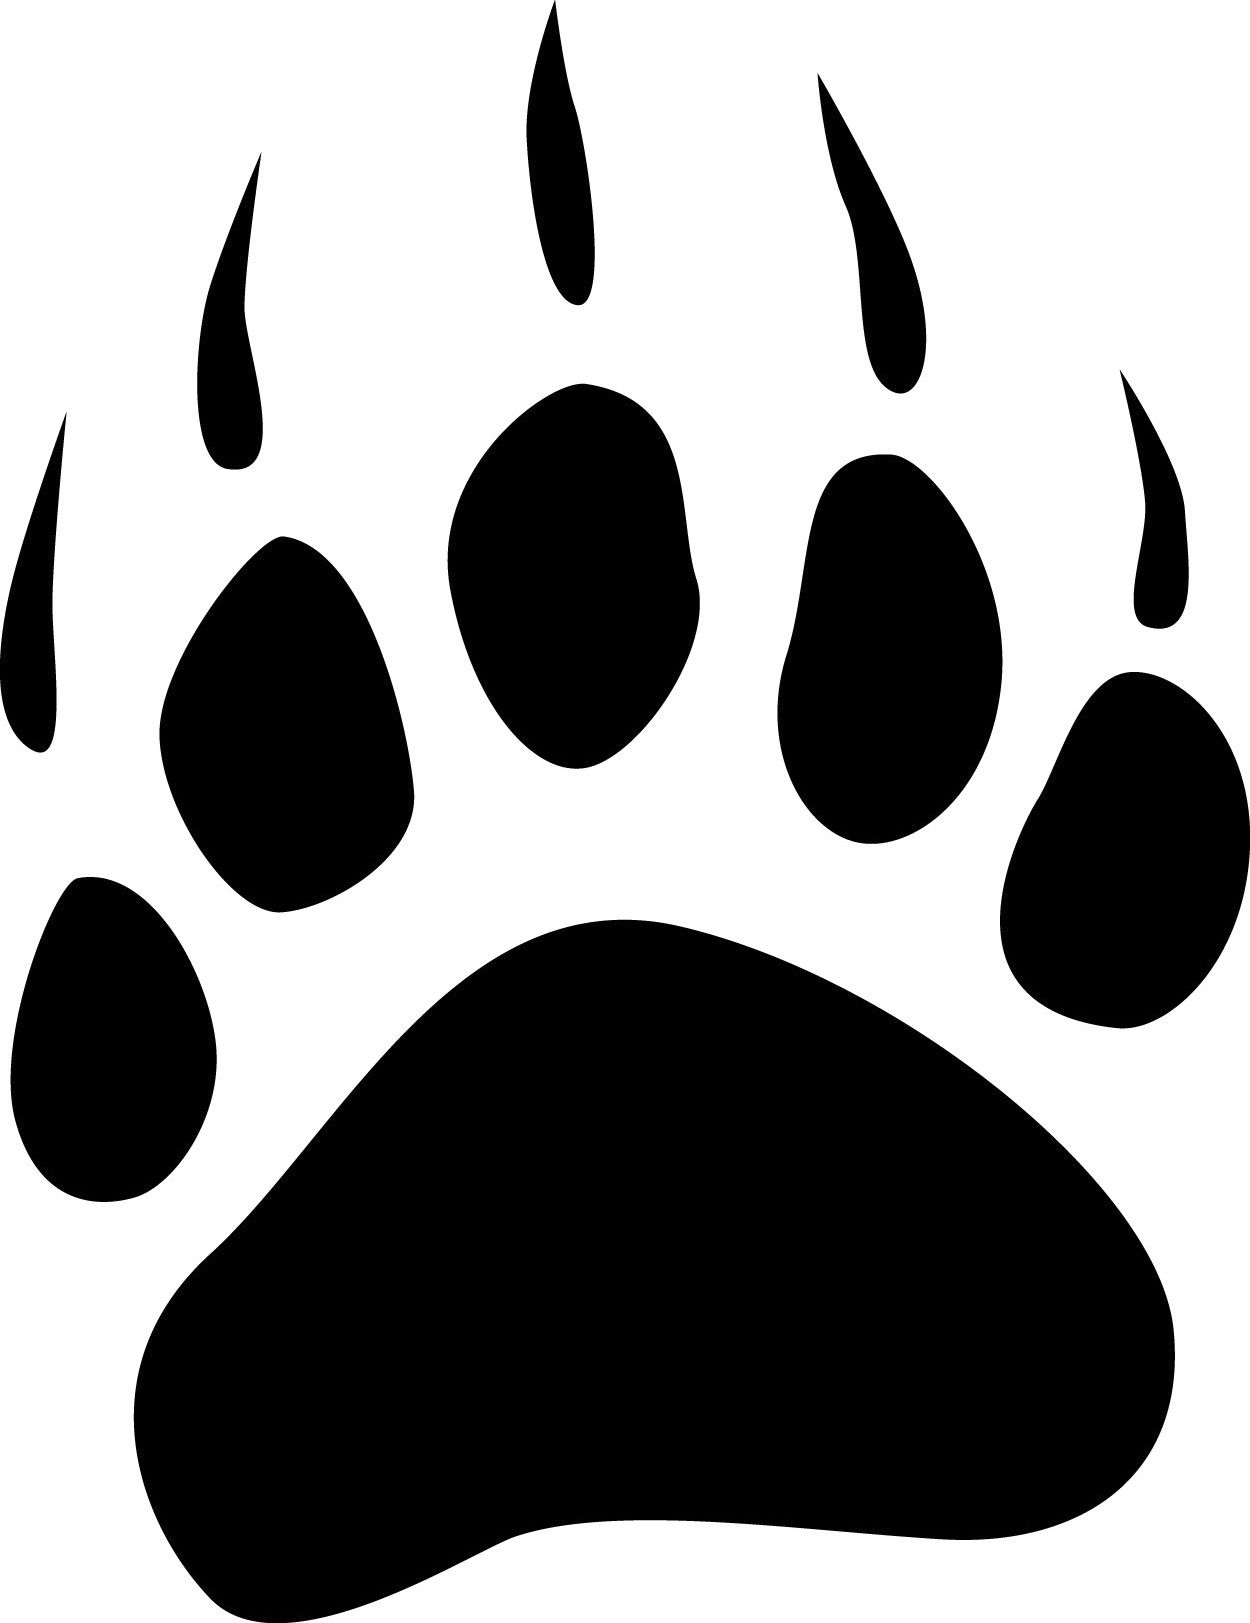 Bearcat Paw Clip Art | bear paw tracks free cliparts that you can ...